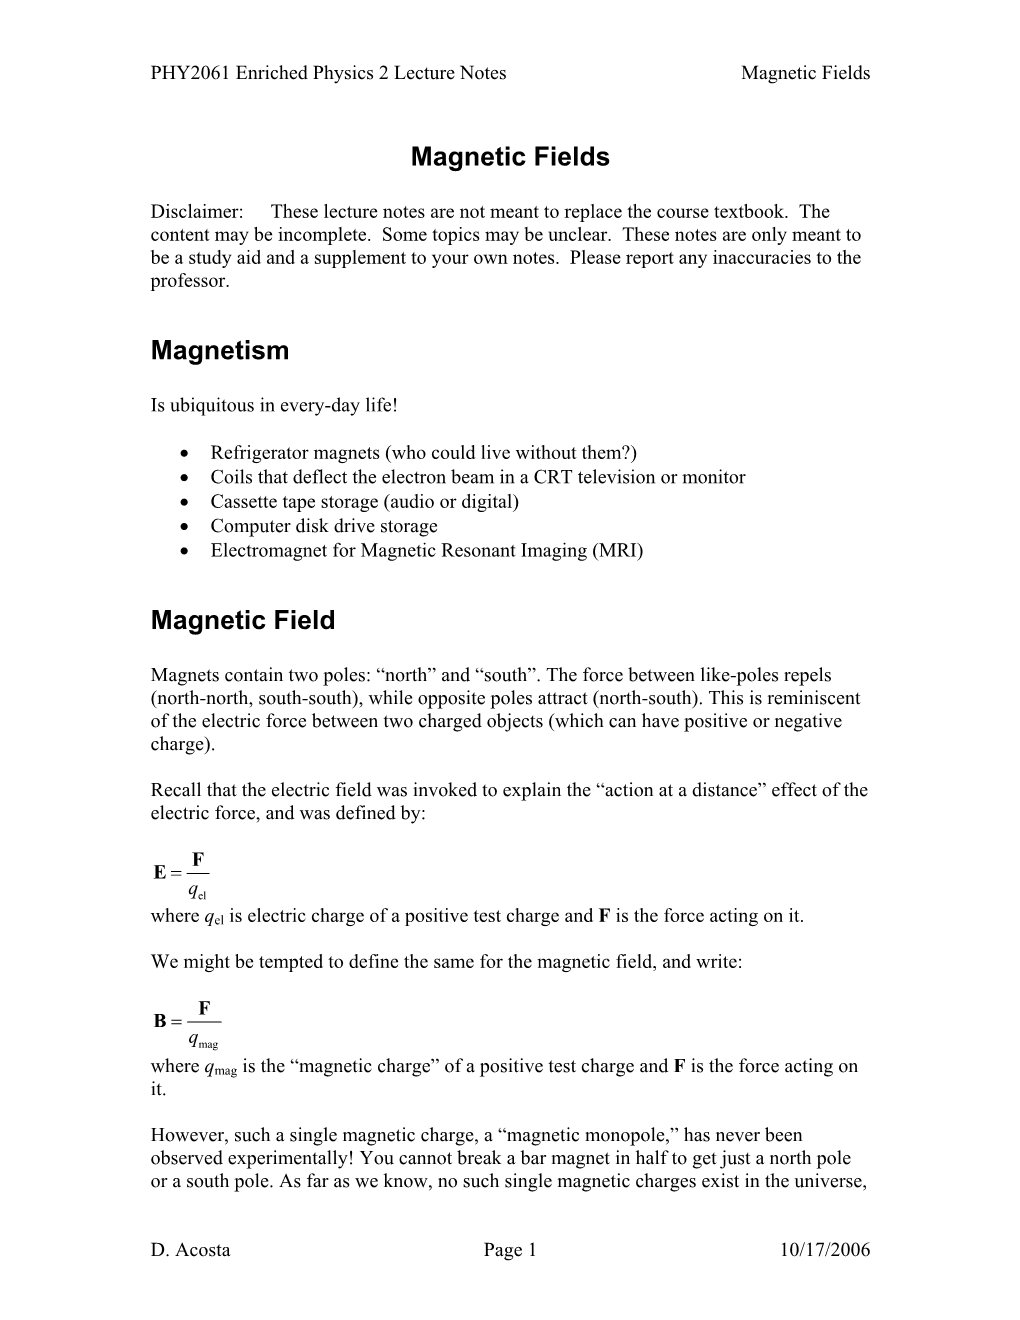 Magnetic Fields Magnetism Magnetic Field